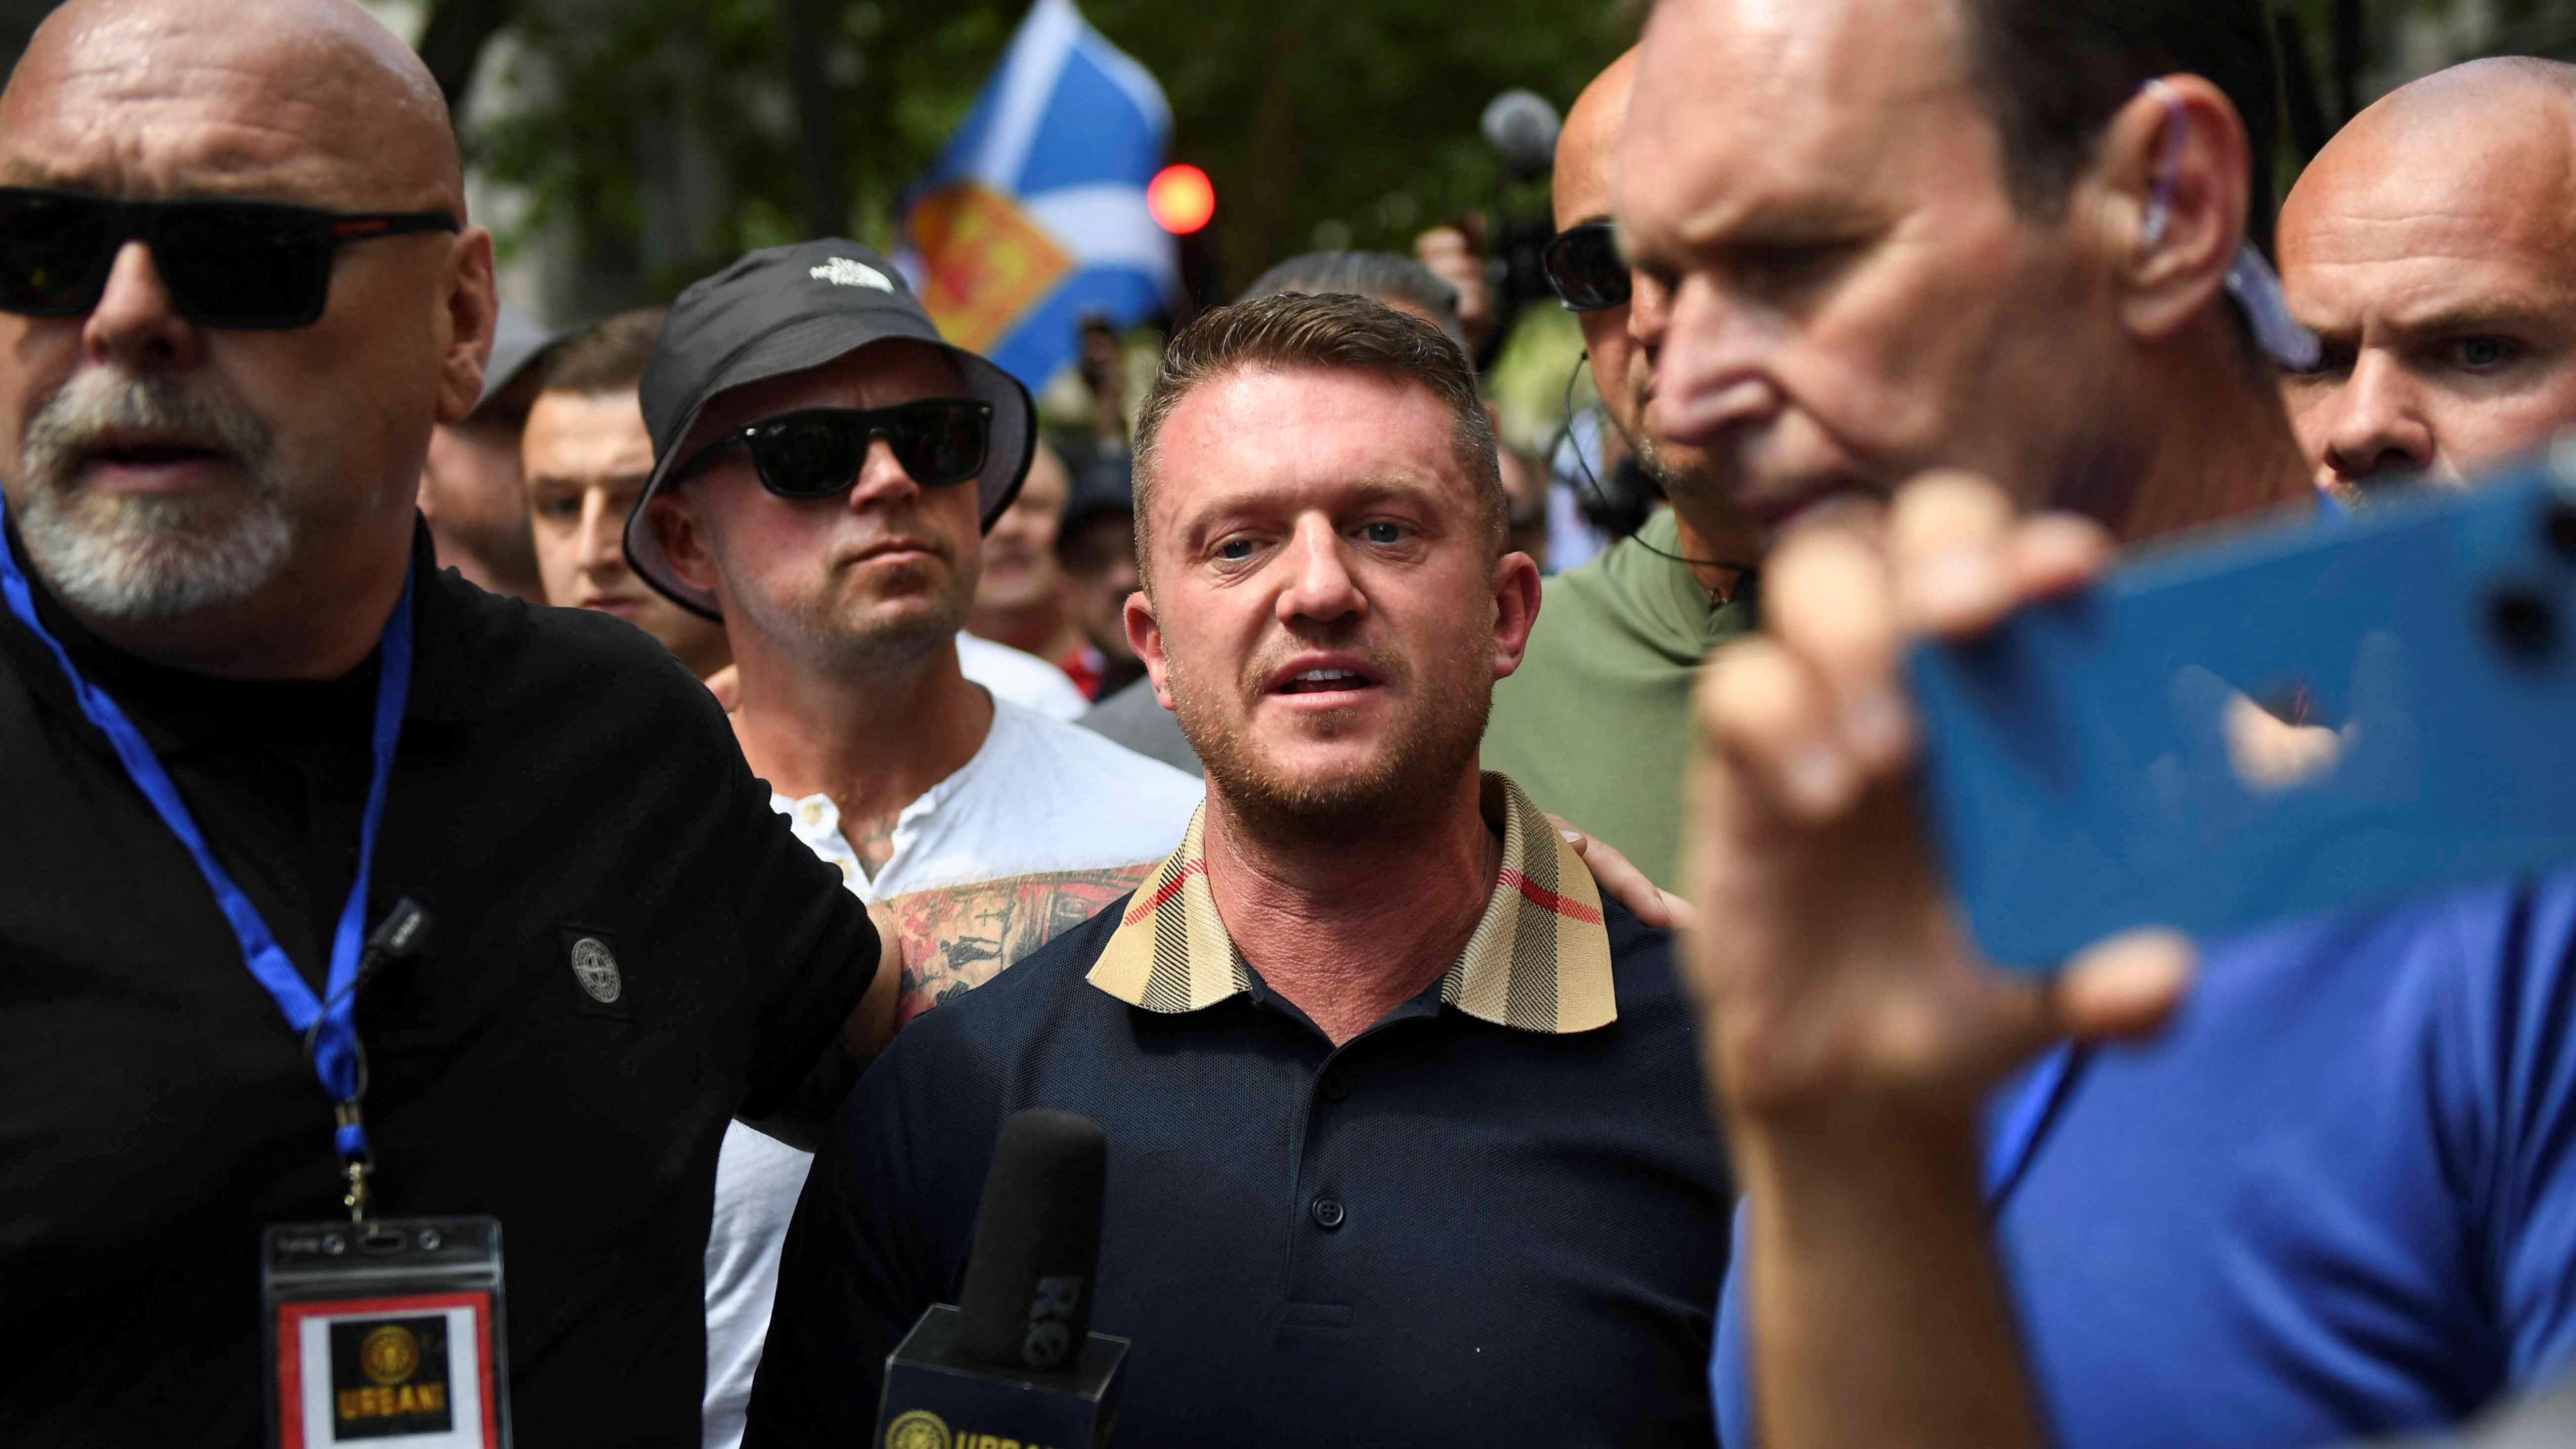 Tommy Robinson leaves UK on eve of court case